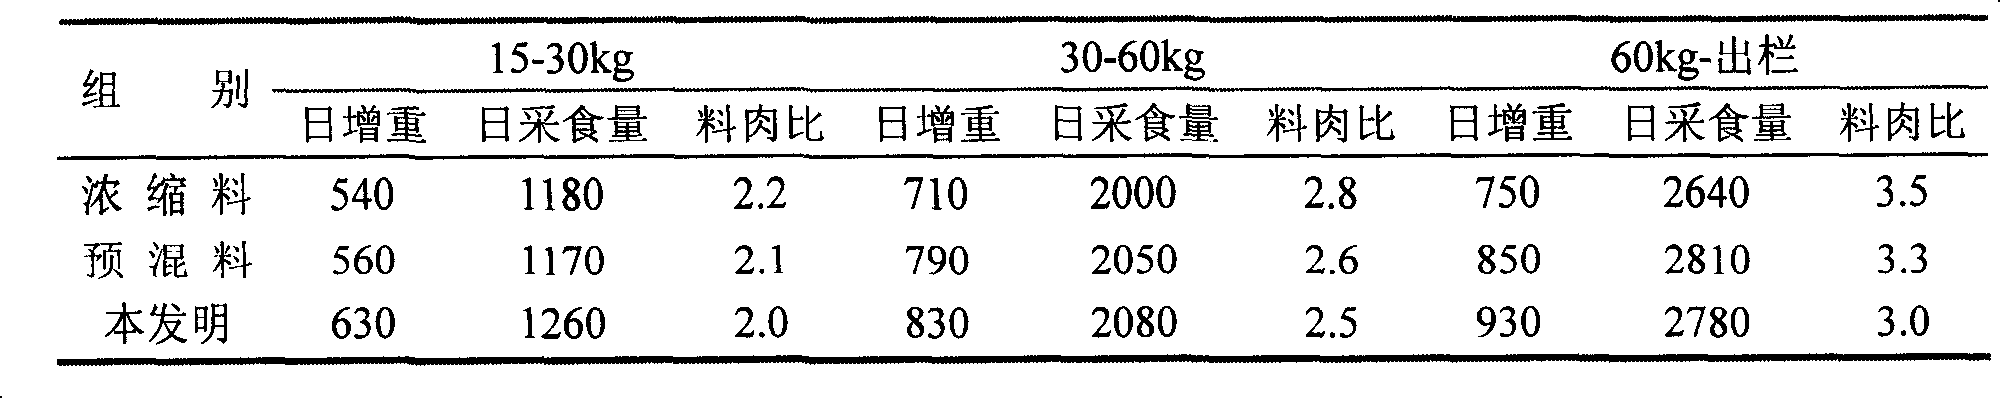 Method for cultivating commodity pig on scale